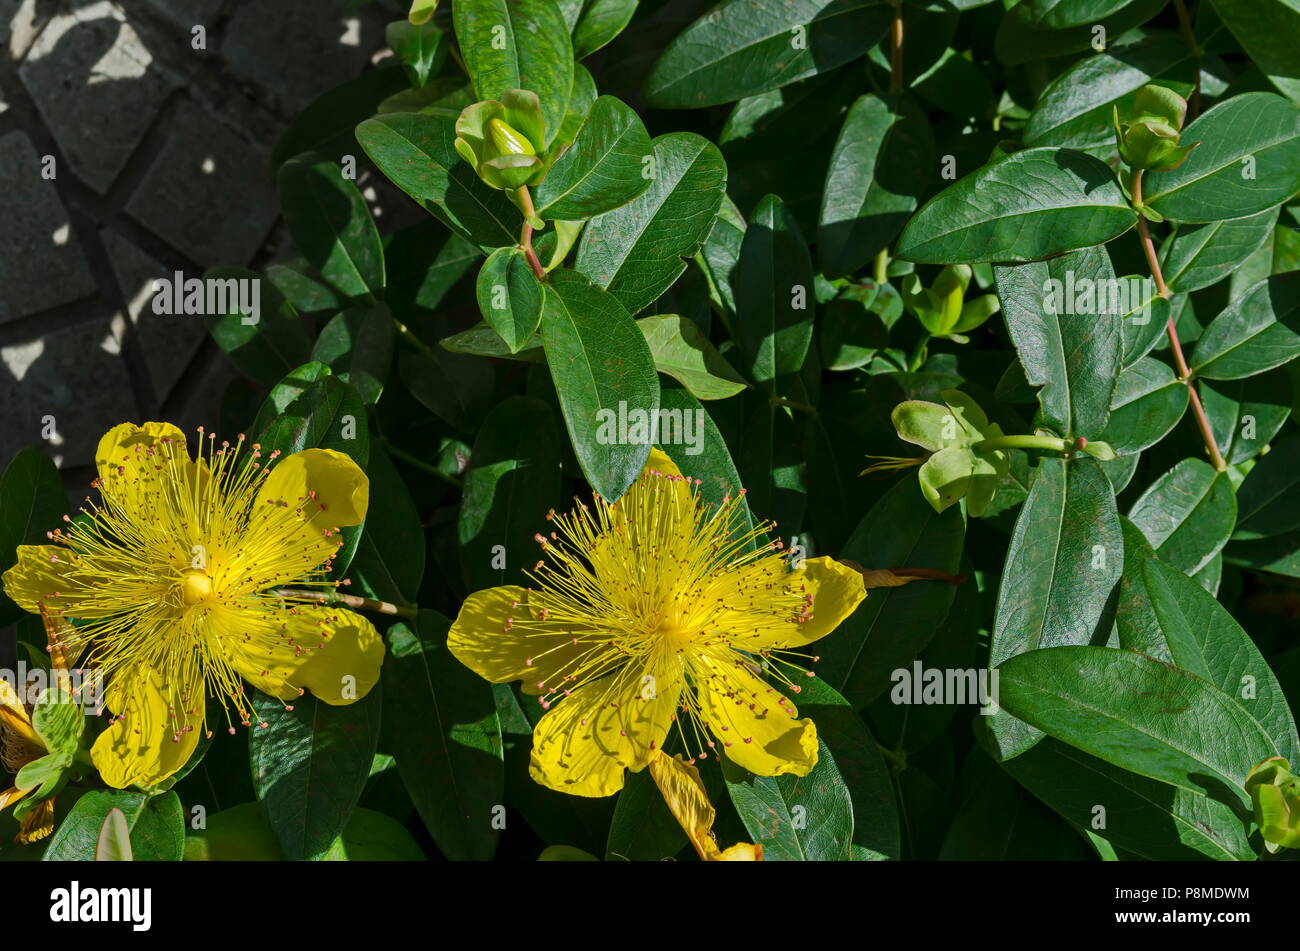 Hypericum calycinum, St. John`s Wort or Yellow Rose of Sharon bush flower close-up with a central mass of bright yellow stamens, Sofia, Bulgaria Stock Photo